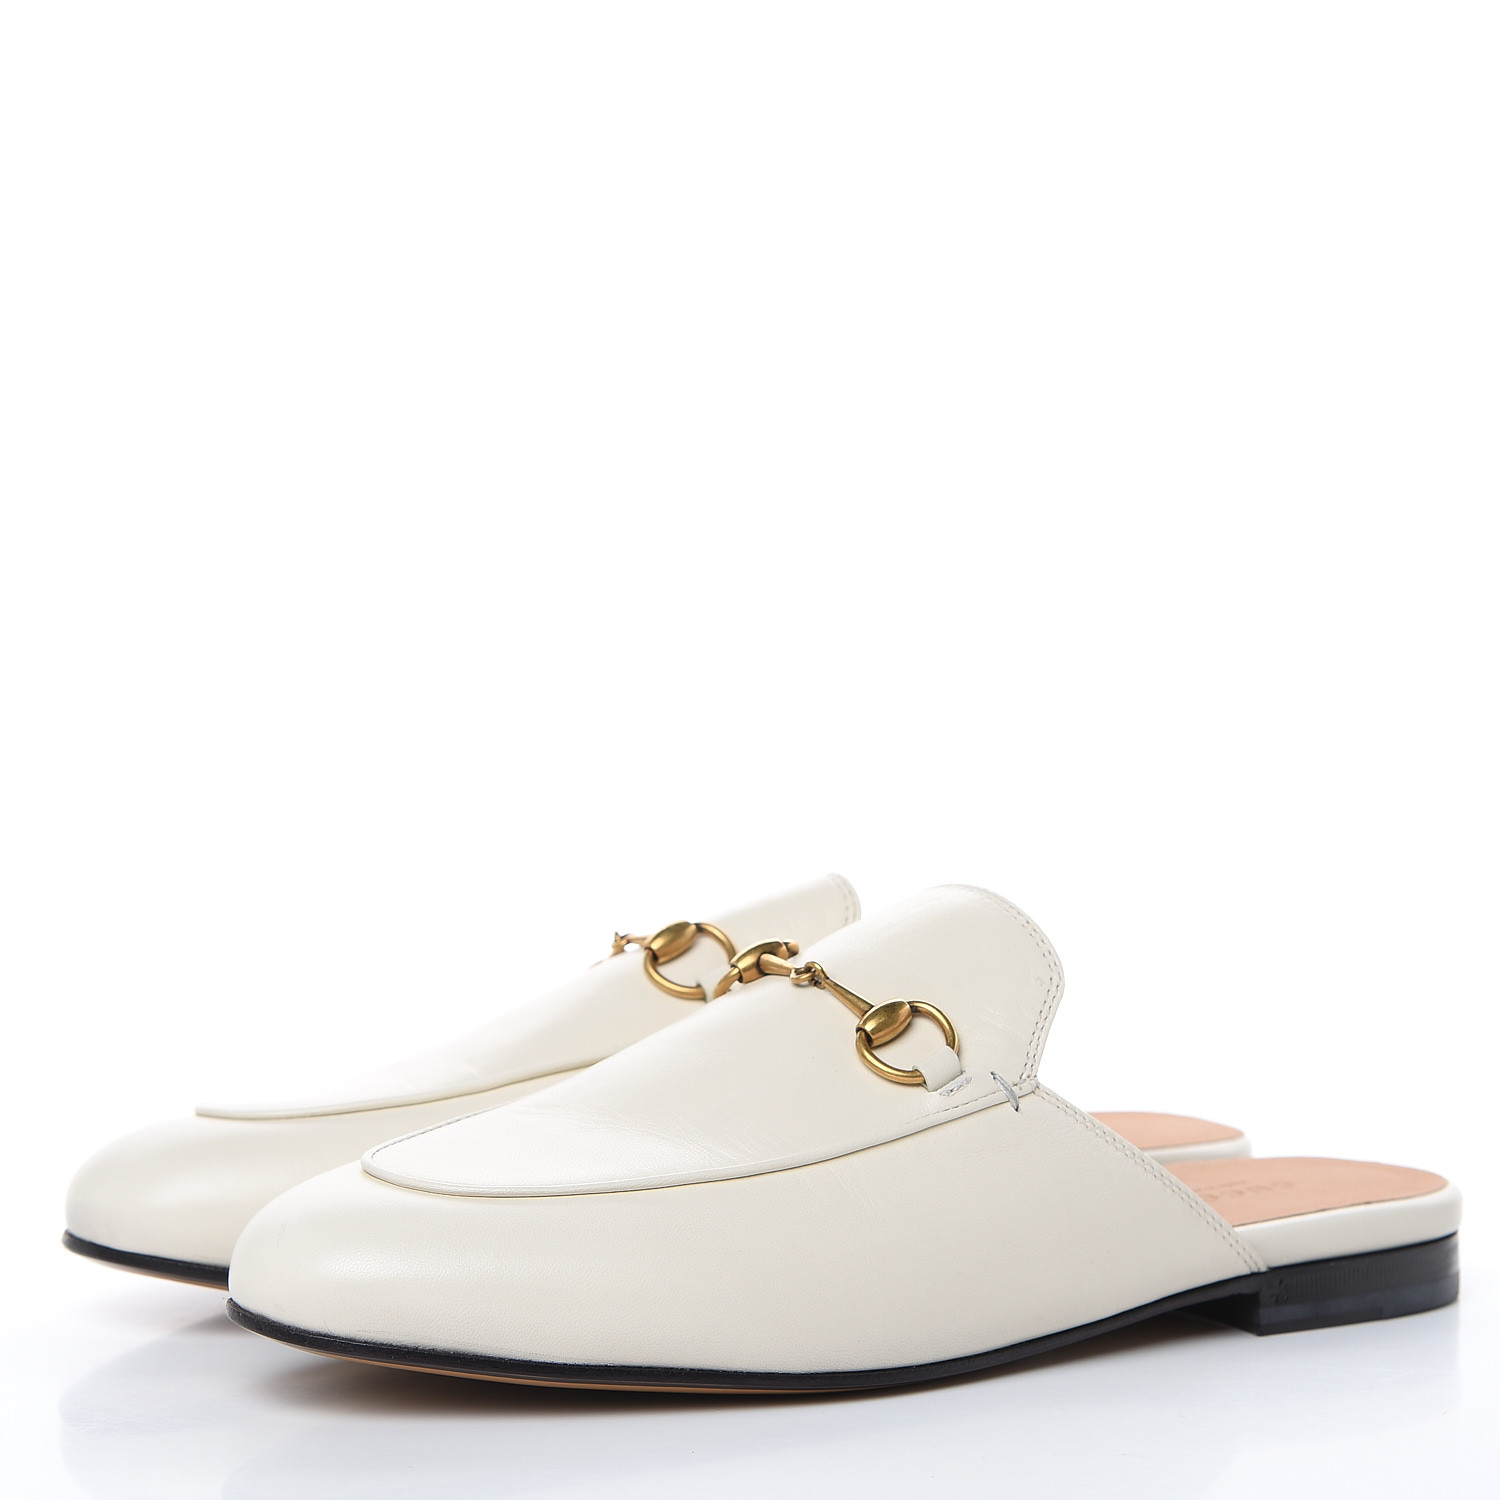 GUCCI Calfskin Princetown Womens Slippers 39.5 Mystic White 469008